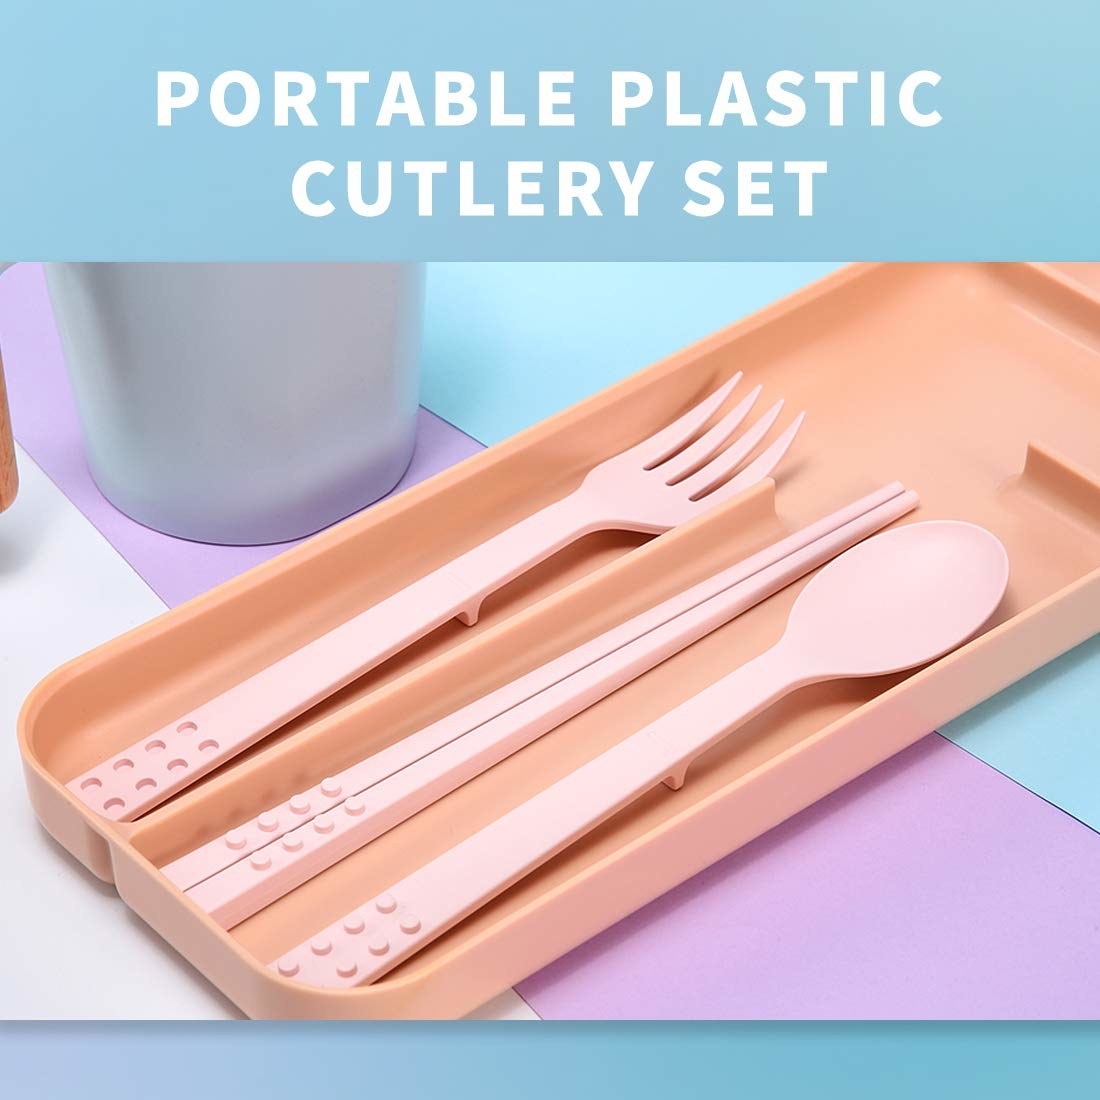 A pale pink cutlery set.